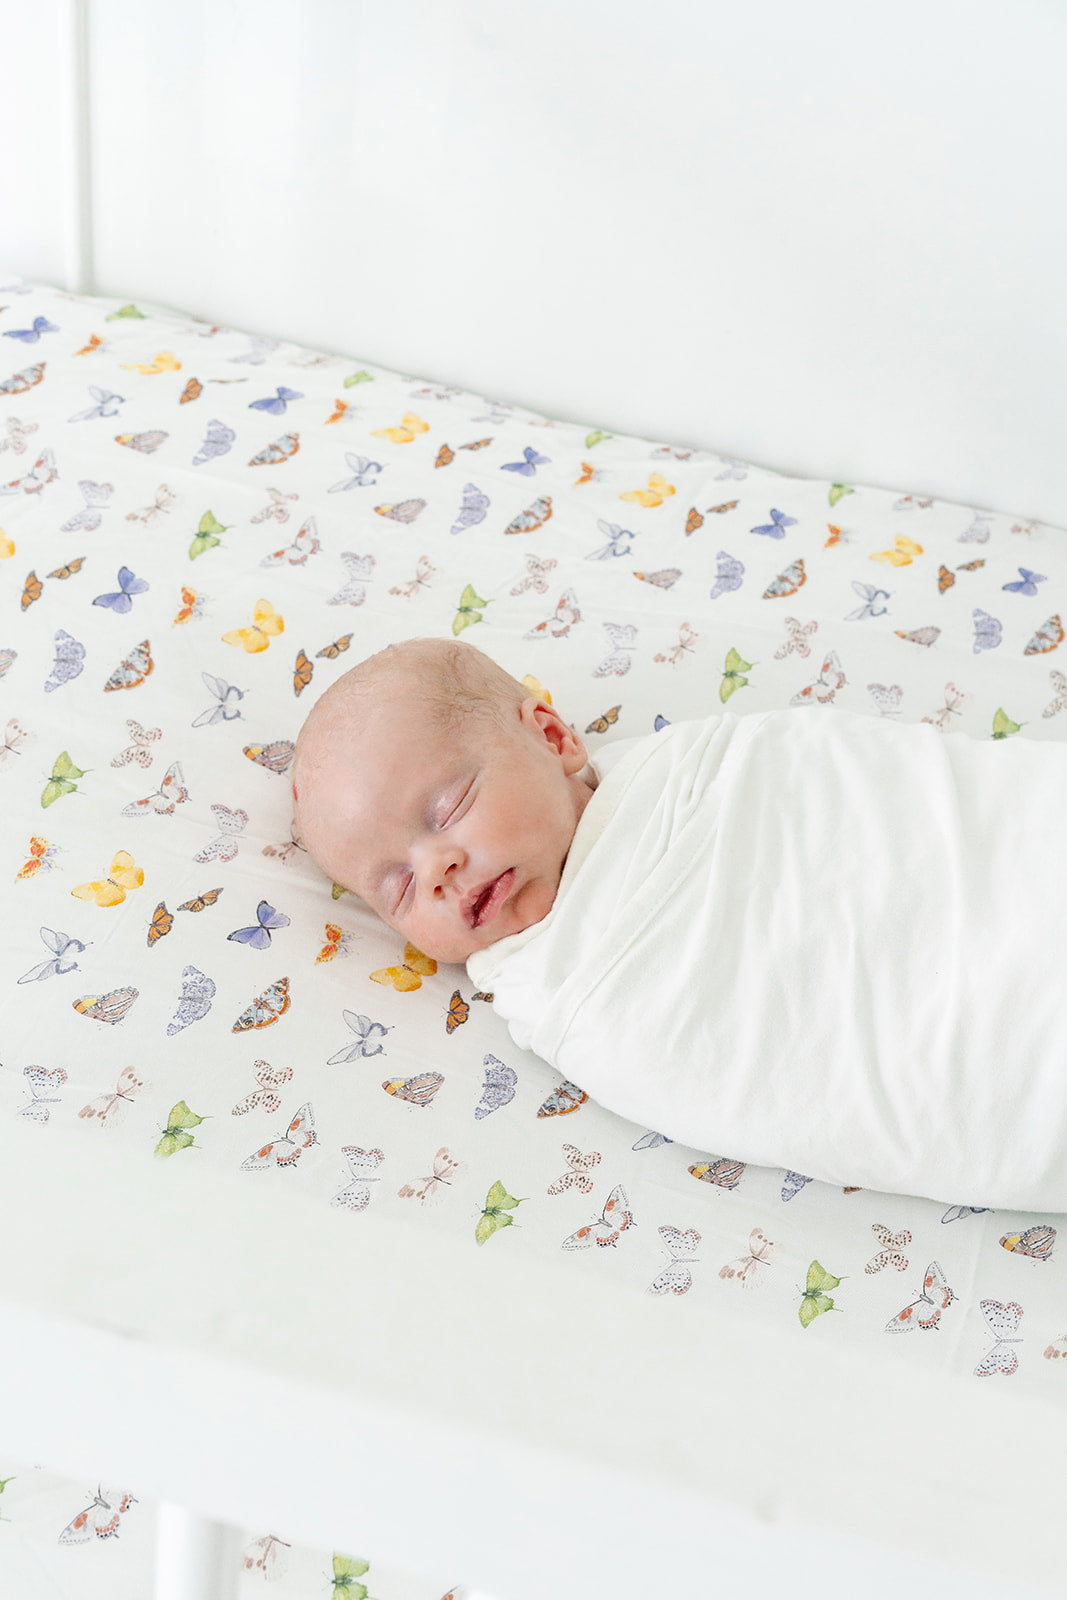 The Butterfly Crib Sheet